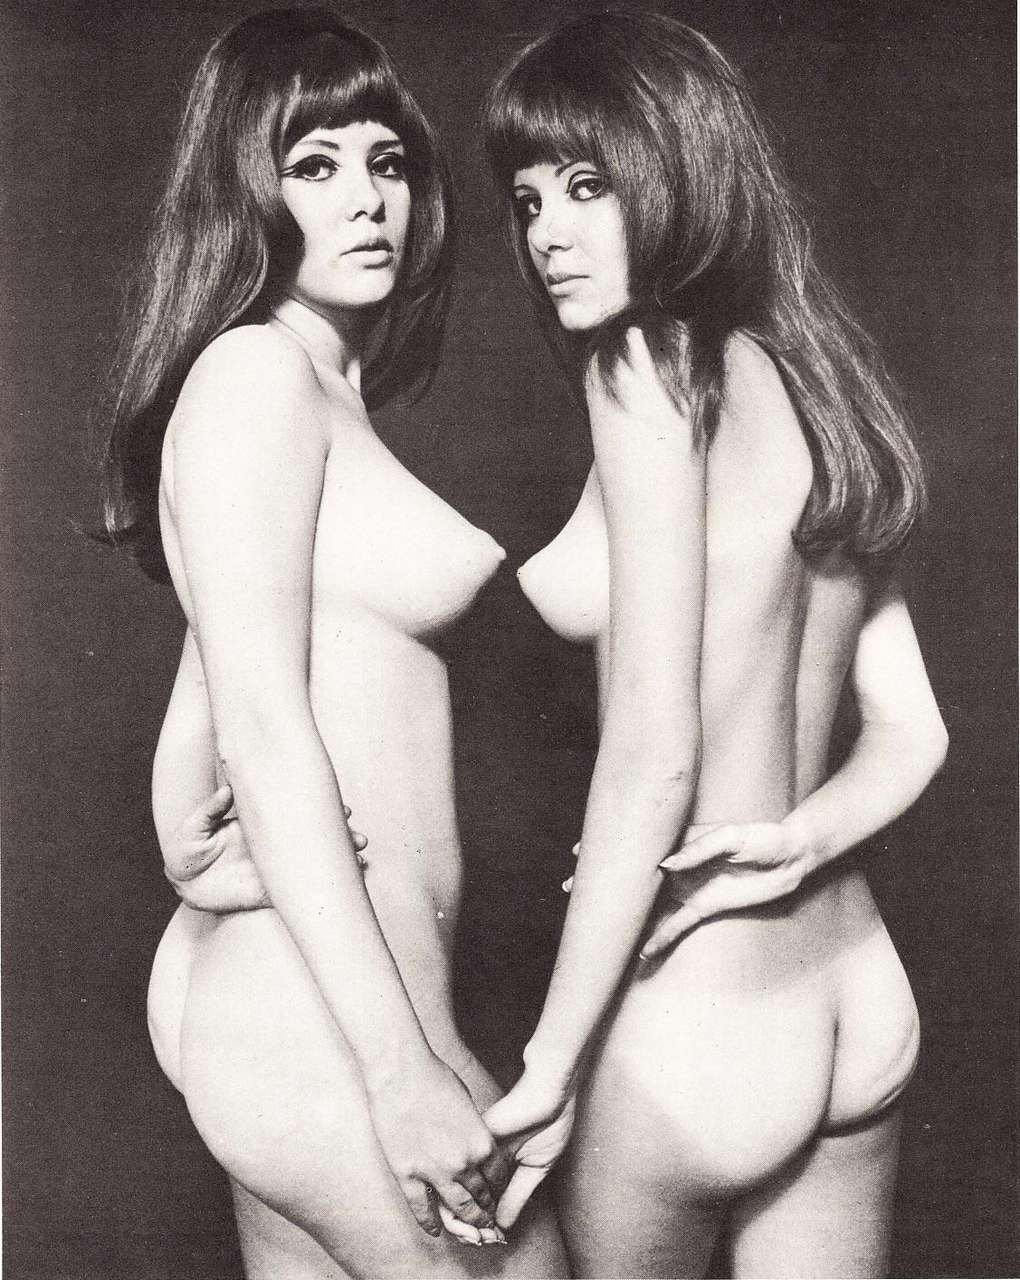 Twins Mary Andamp Madeleine Collinson 1970s Album Link In Comments NSF